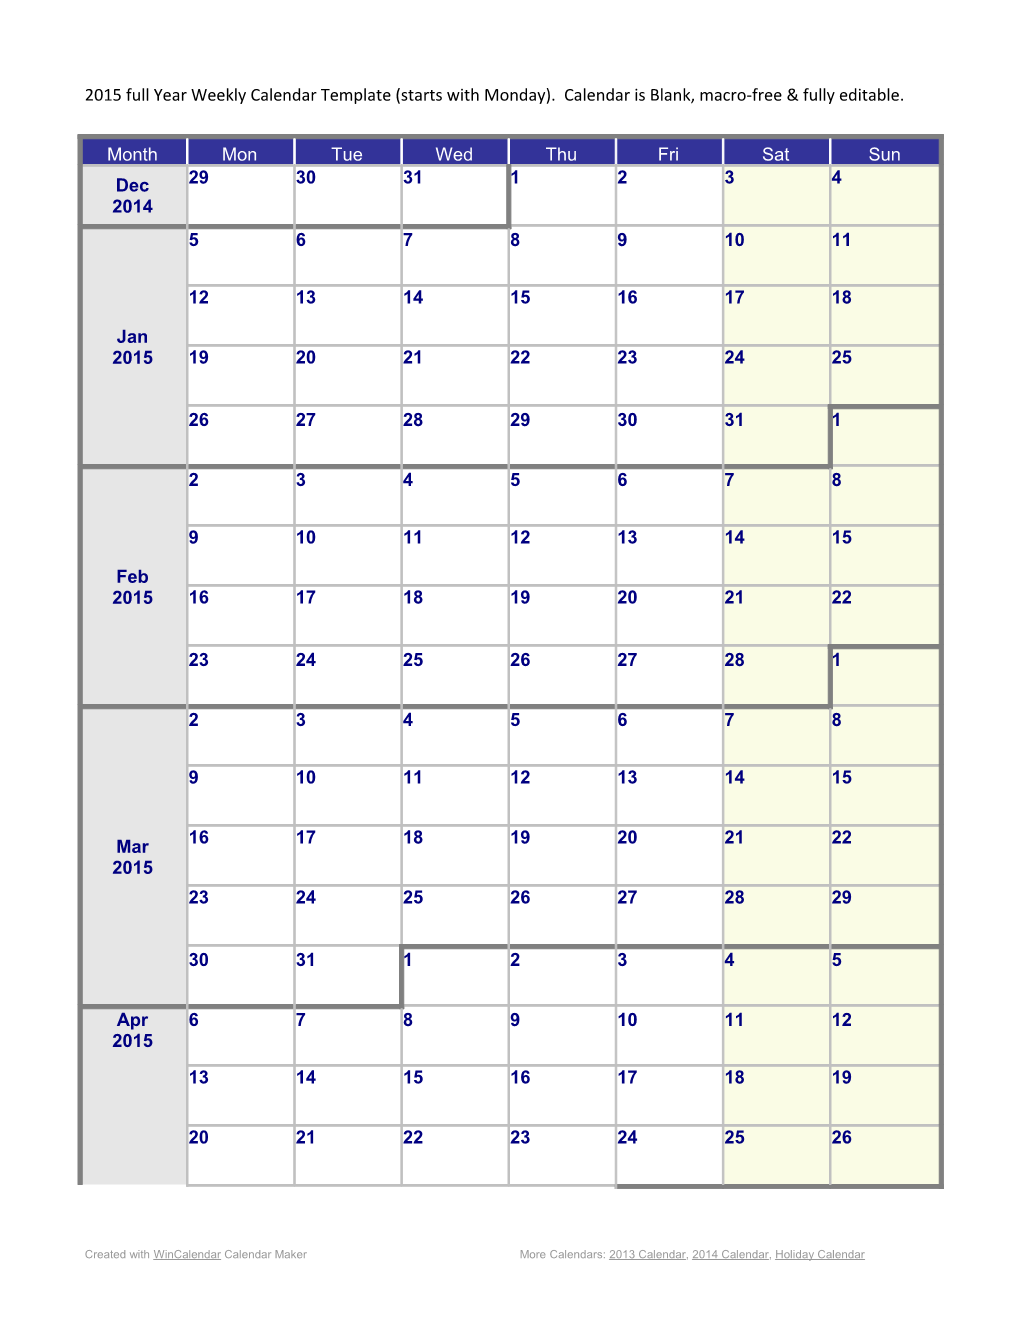 Monday Starting Weekly Calendar for 2015